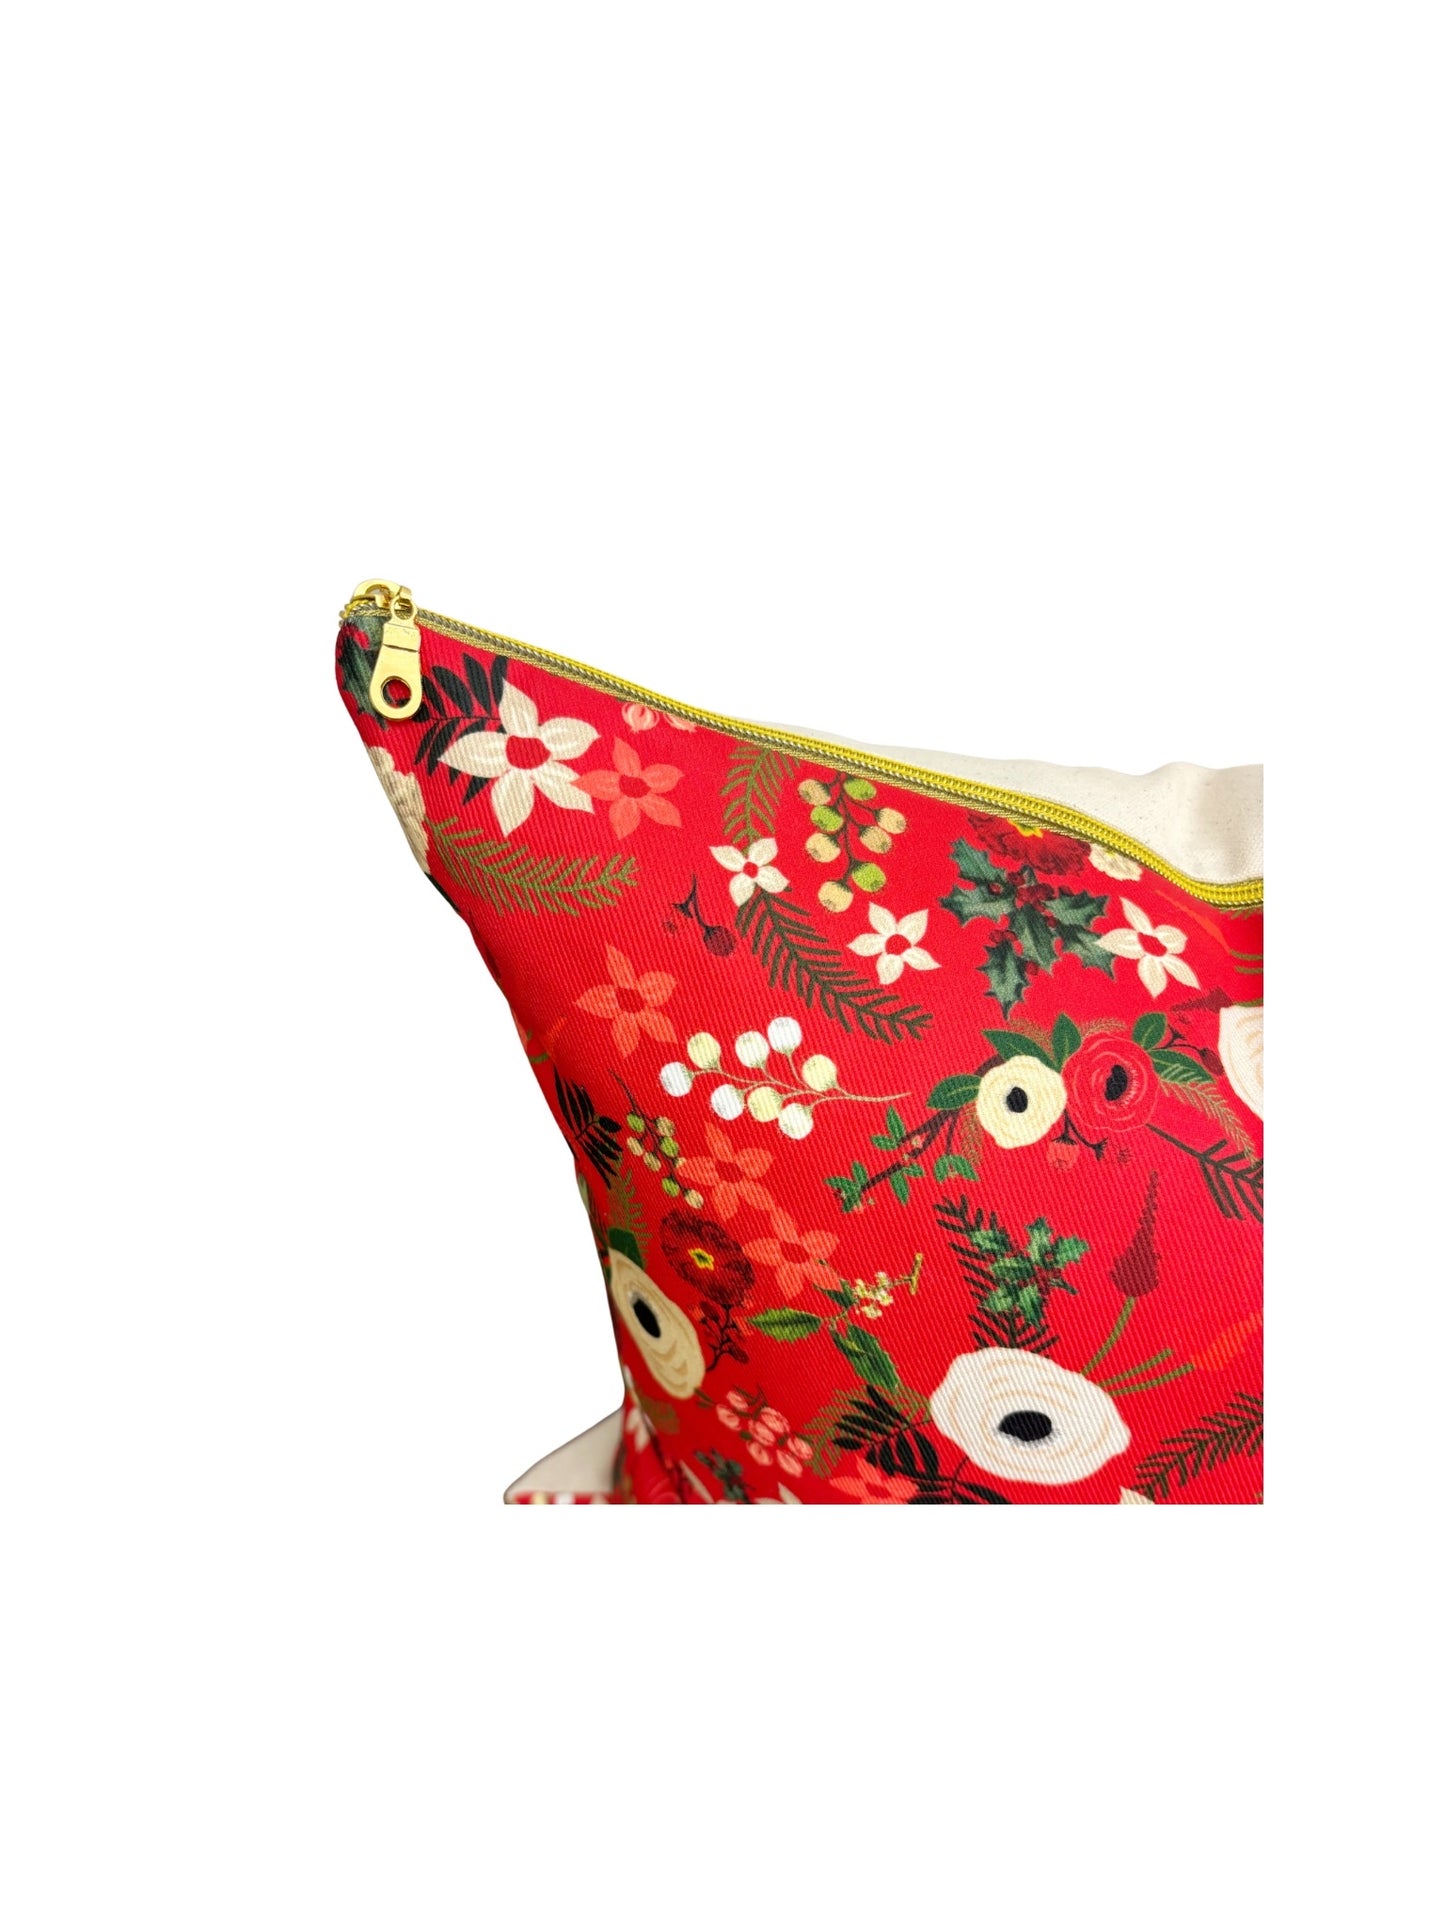 Vintage Christmas Pillow Cover - Red